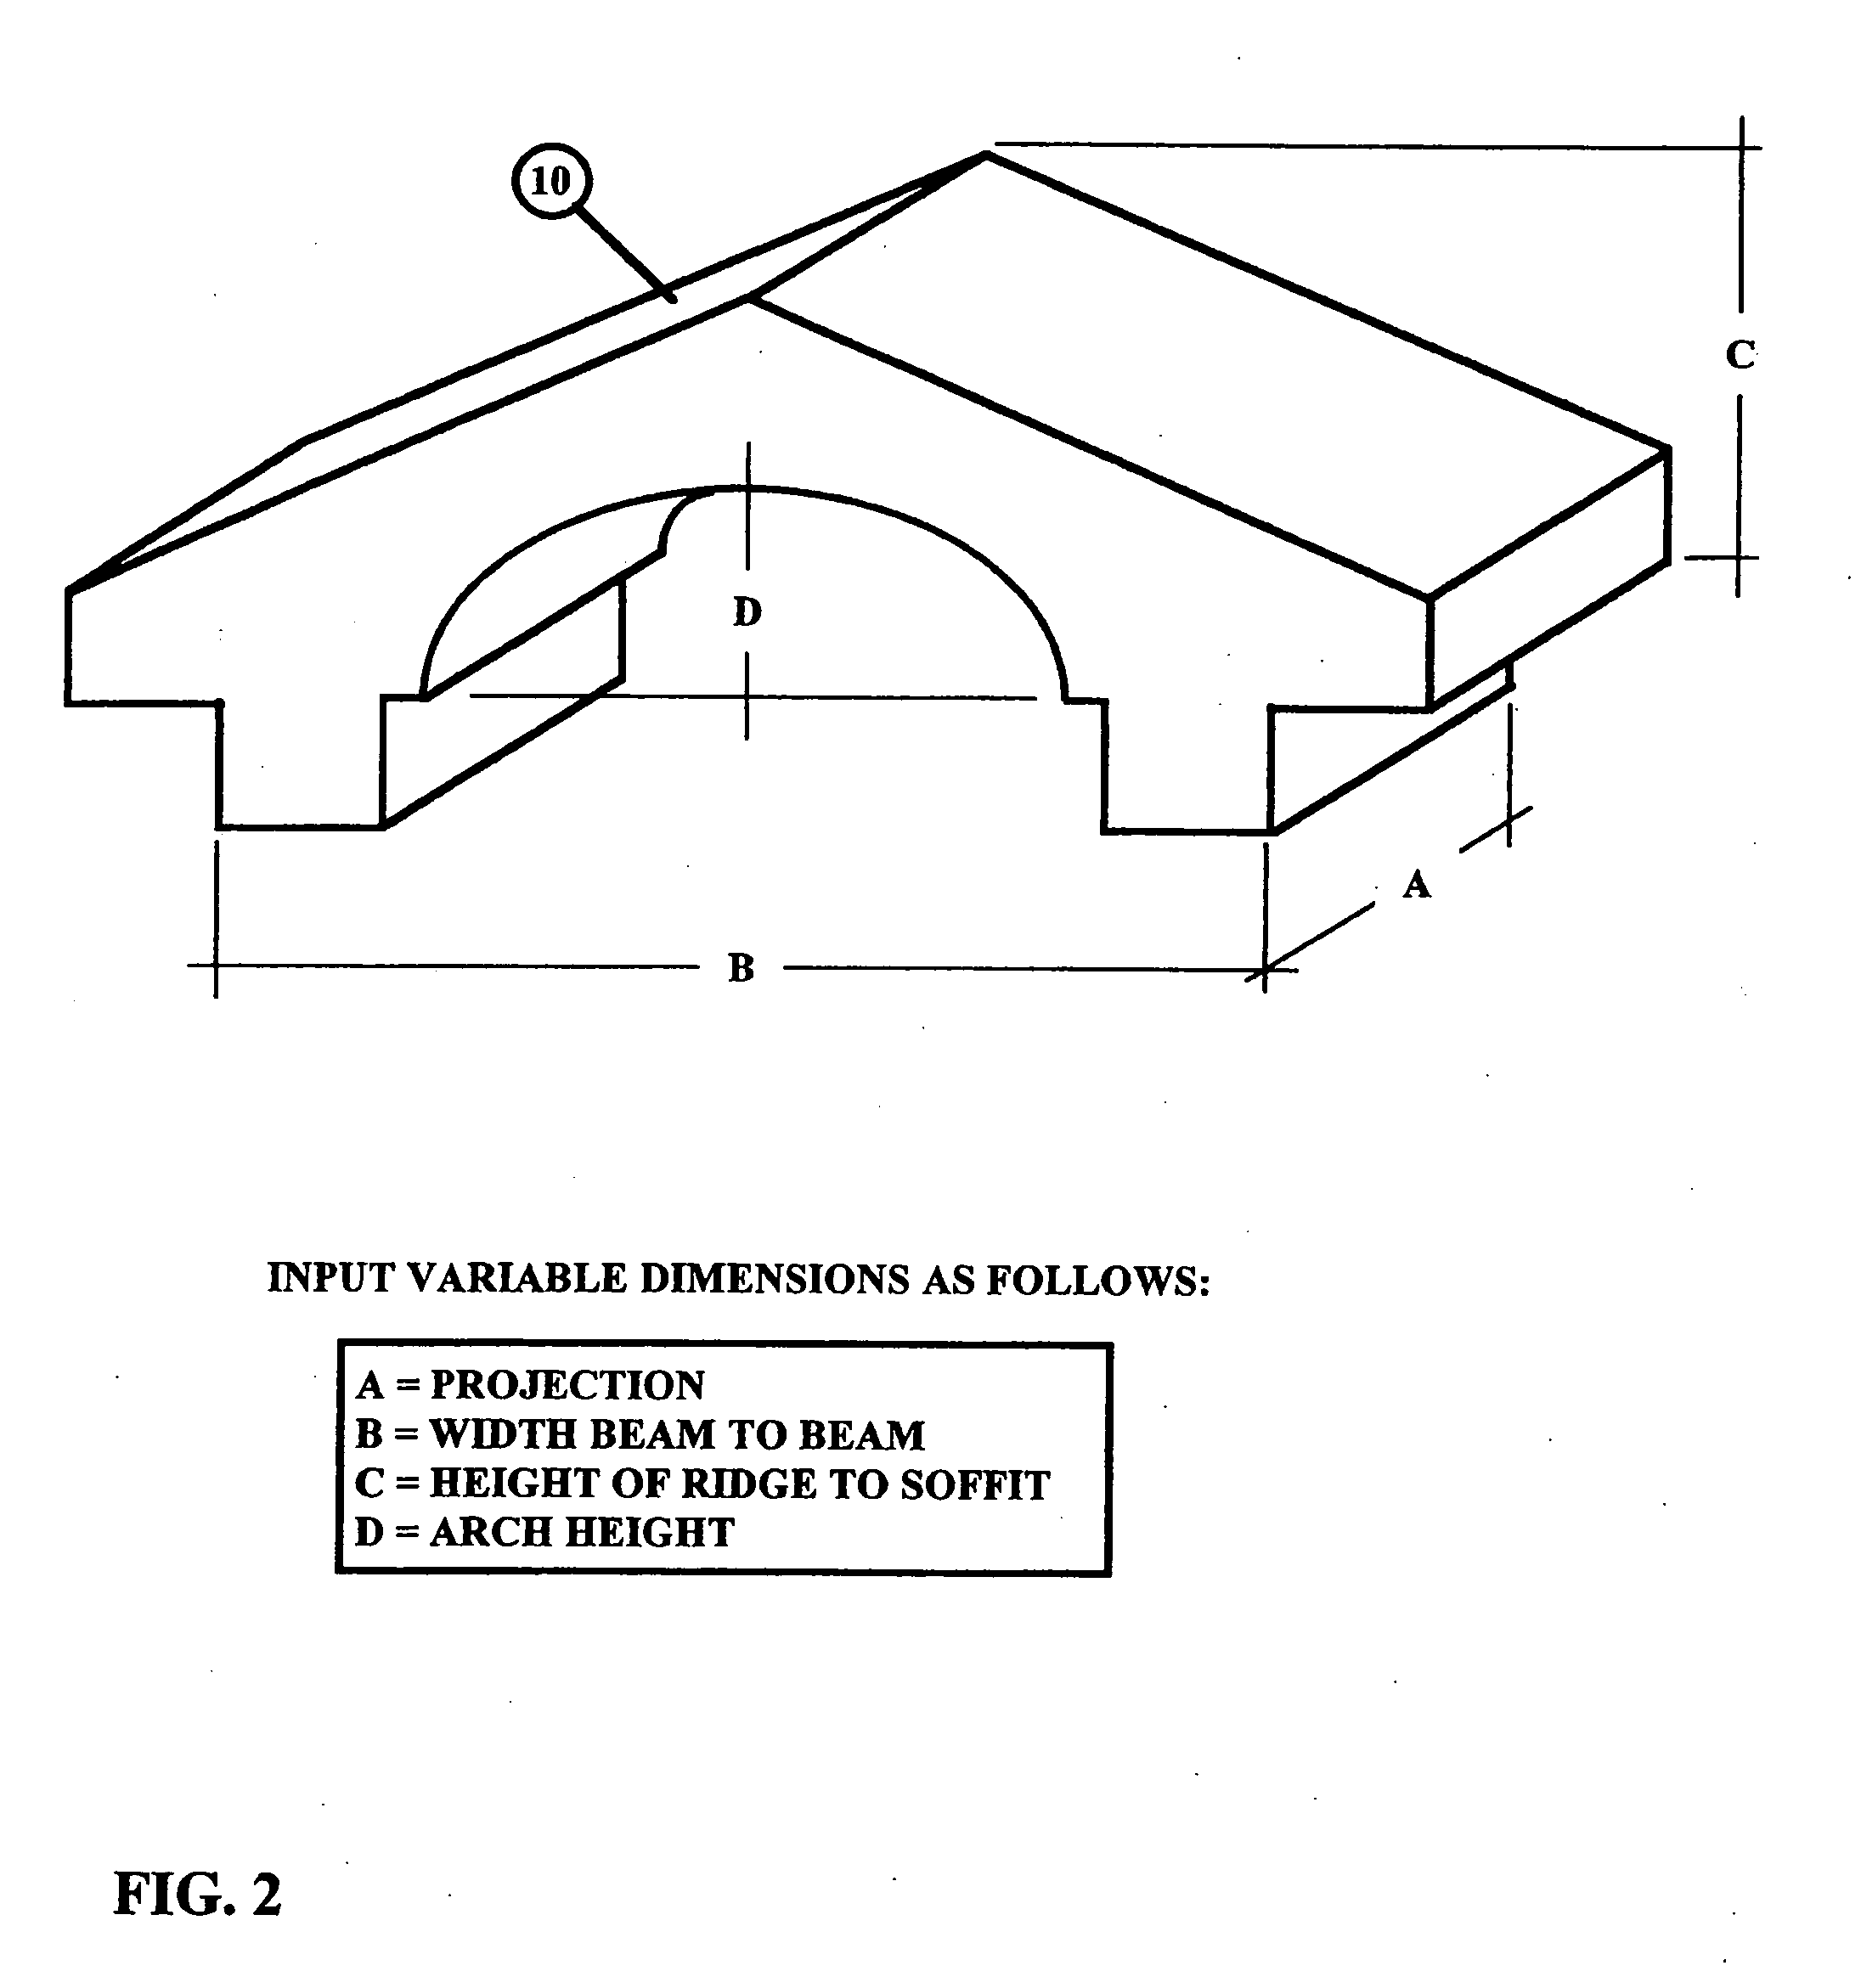 Self aligning three dimensional support structure for a roof constructed with prefabricated components